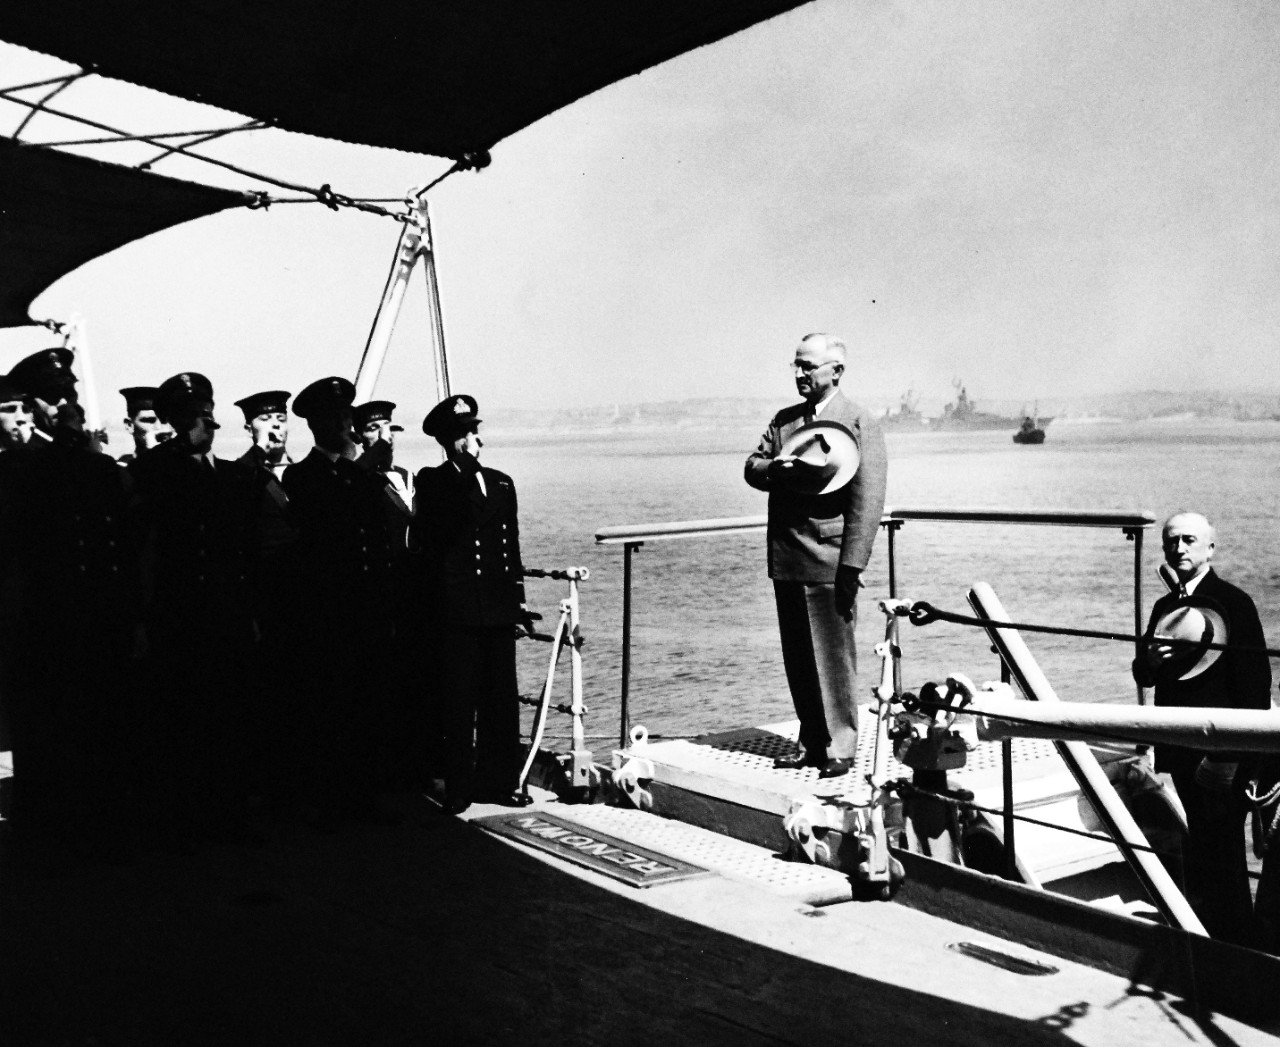 80-G-700236:  Potsdam Conference, July-August 1945.  President Harry S. Truman pays call on King George onboard his ship, HMS Renown in Plymouth Harbor, England.  President Truman receives side honors.  Behind him is Secretary of State James F. Byrnes.  Photograph released August 2, 1945.  Official U.S. Navy Photograph, now in the collections of the National Archives.  (2016/02/23).